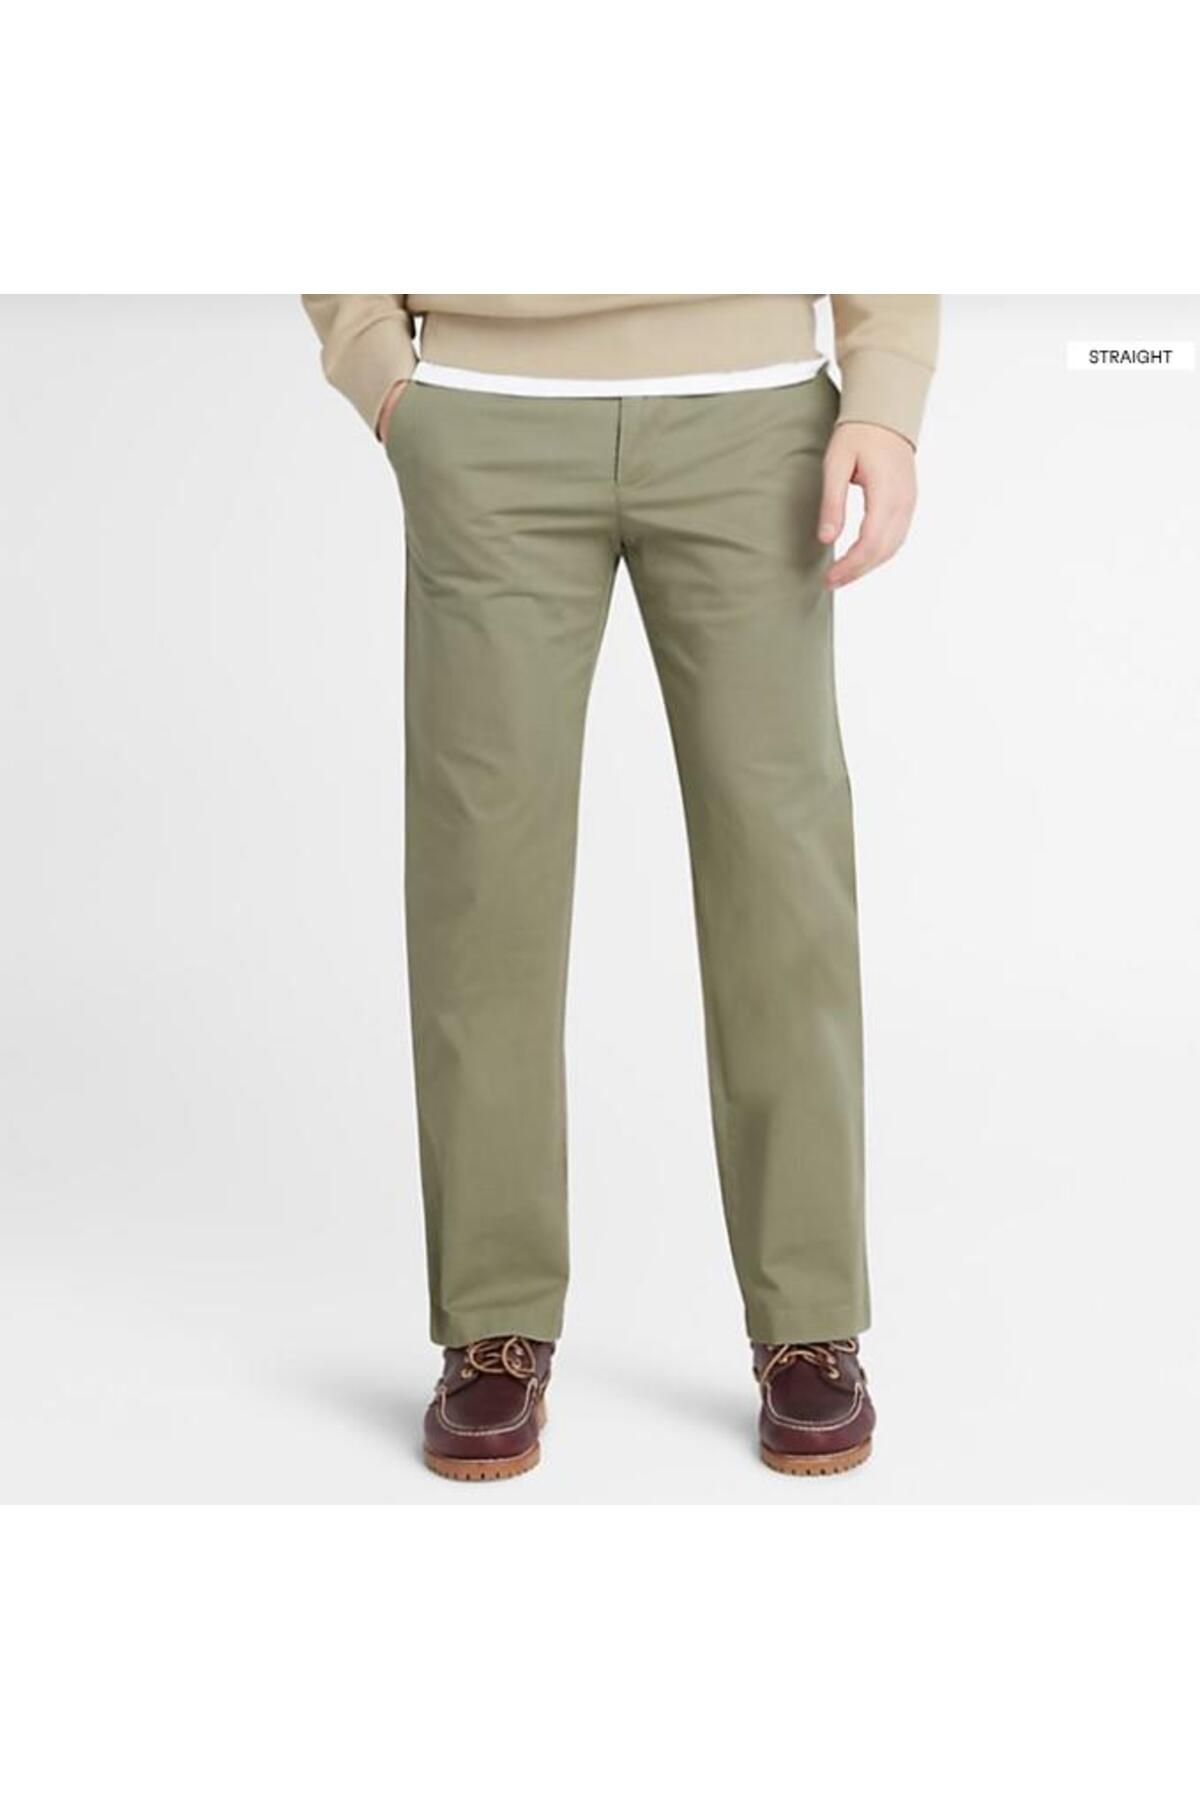 Timberland Claremont Twill Chino Pant (Straight) - Cassel Earth